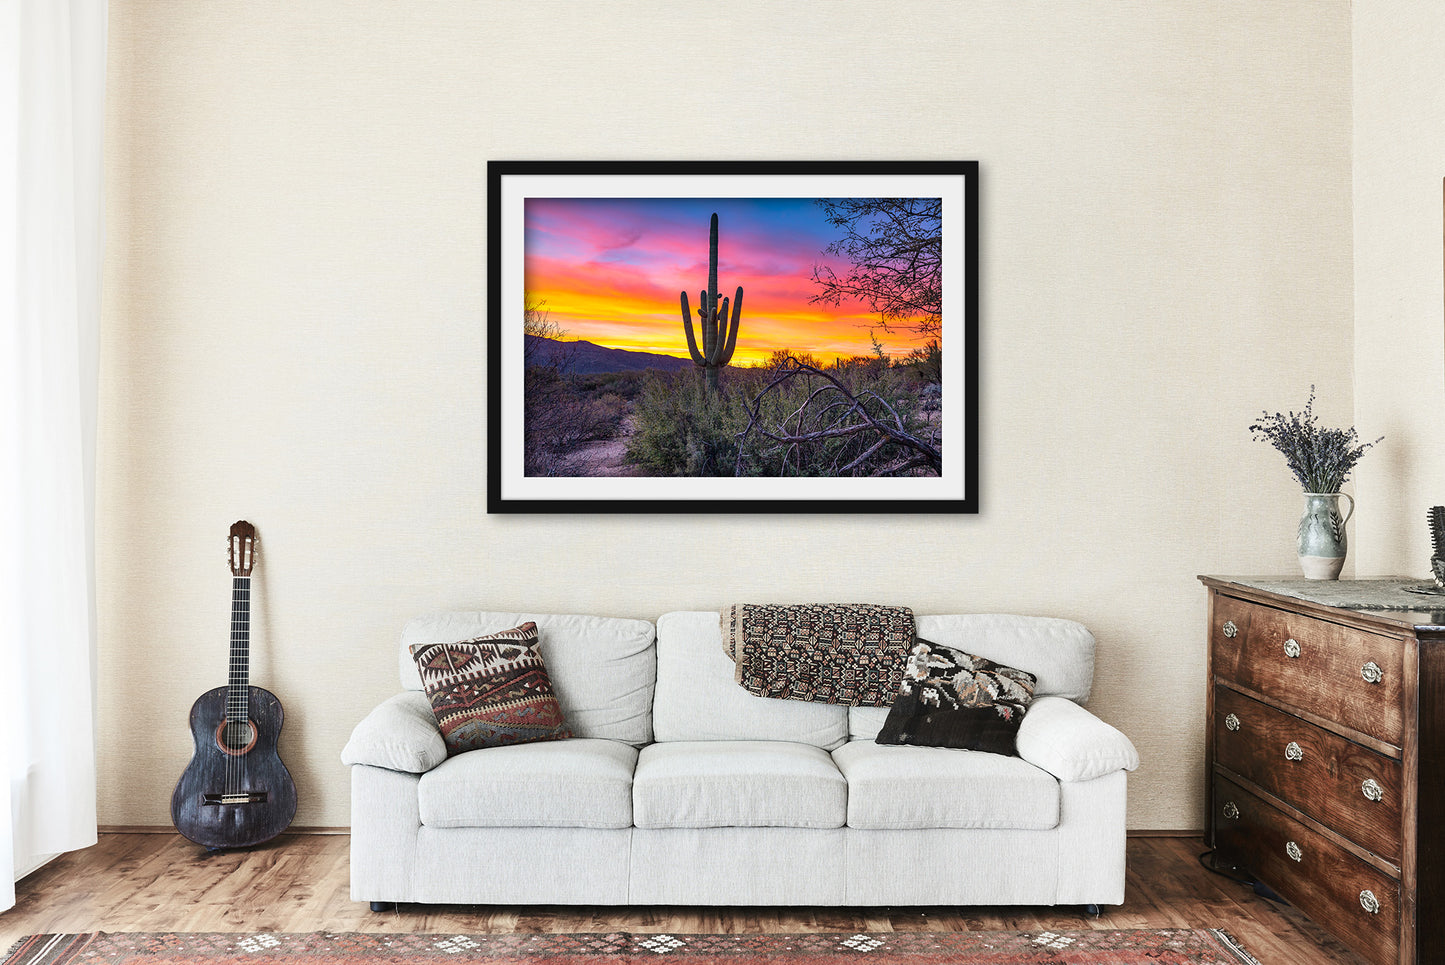 Framed and Matted Print - Picture of Saguaro Cactus at Sunrise in Sonoran Desert near Tucson Arizona - Desert Southwest Wall Art Photo Decor